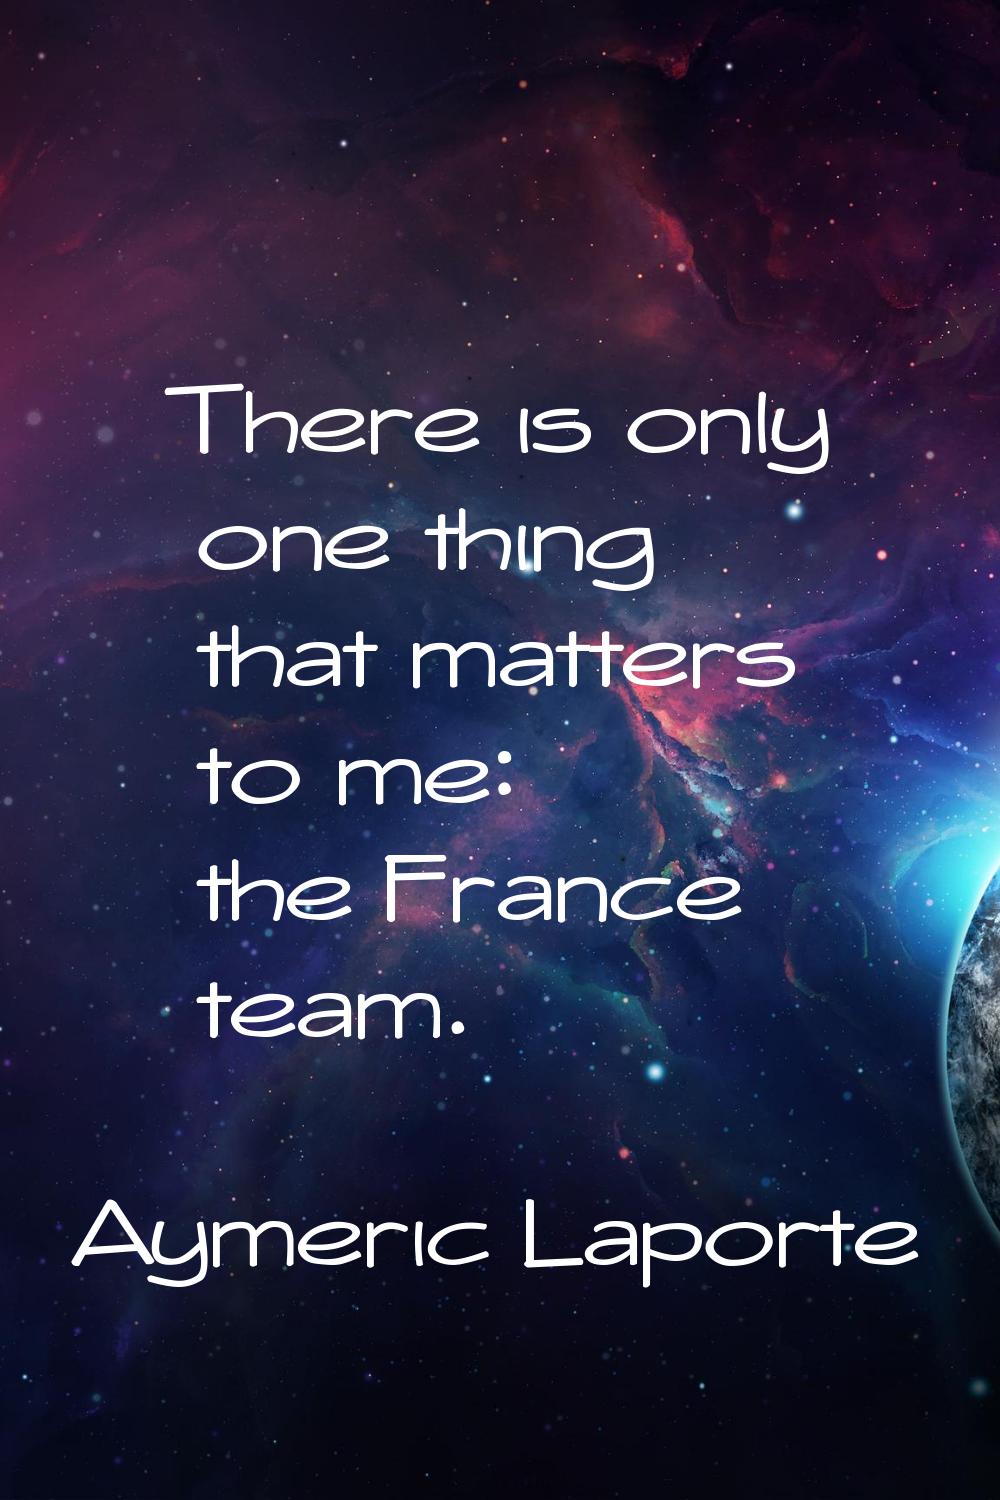 There is only one thing that matters to me: the France team.